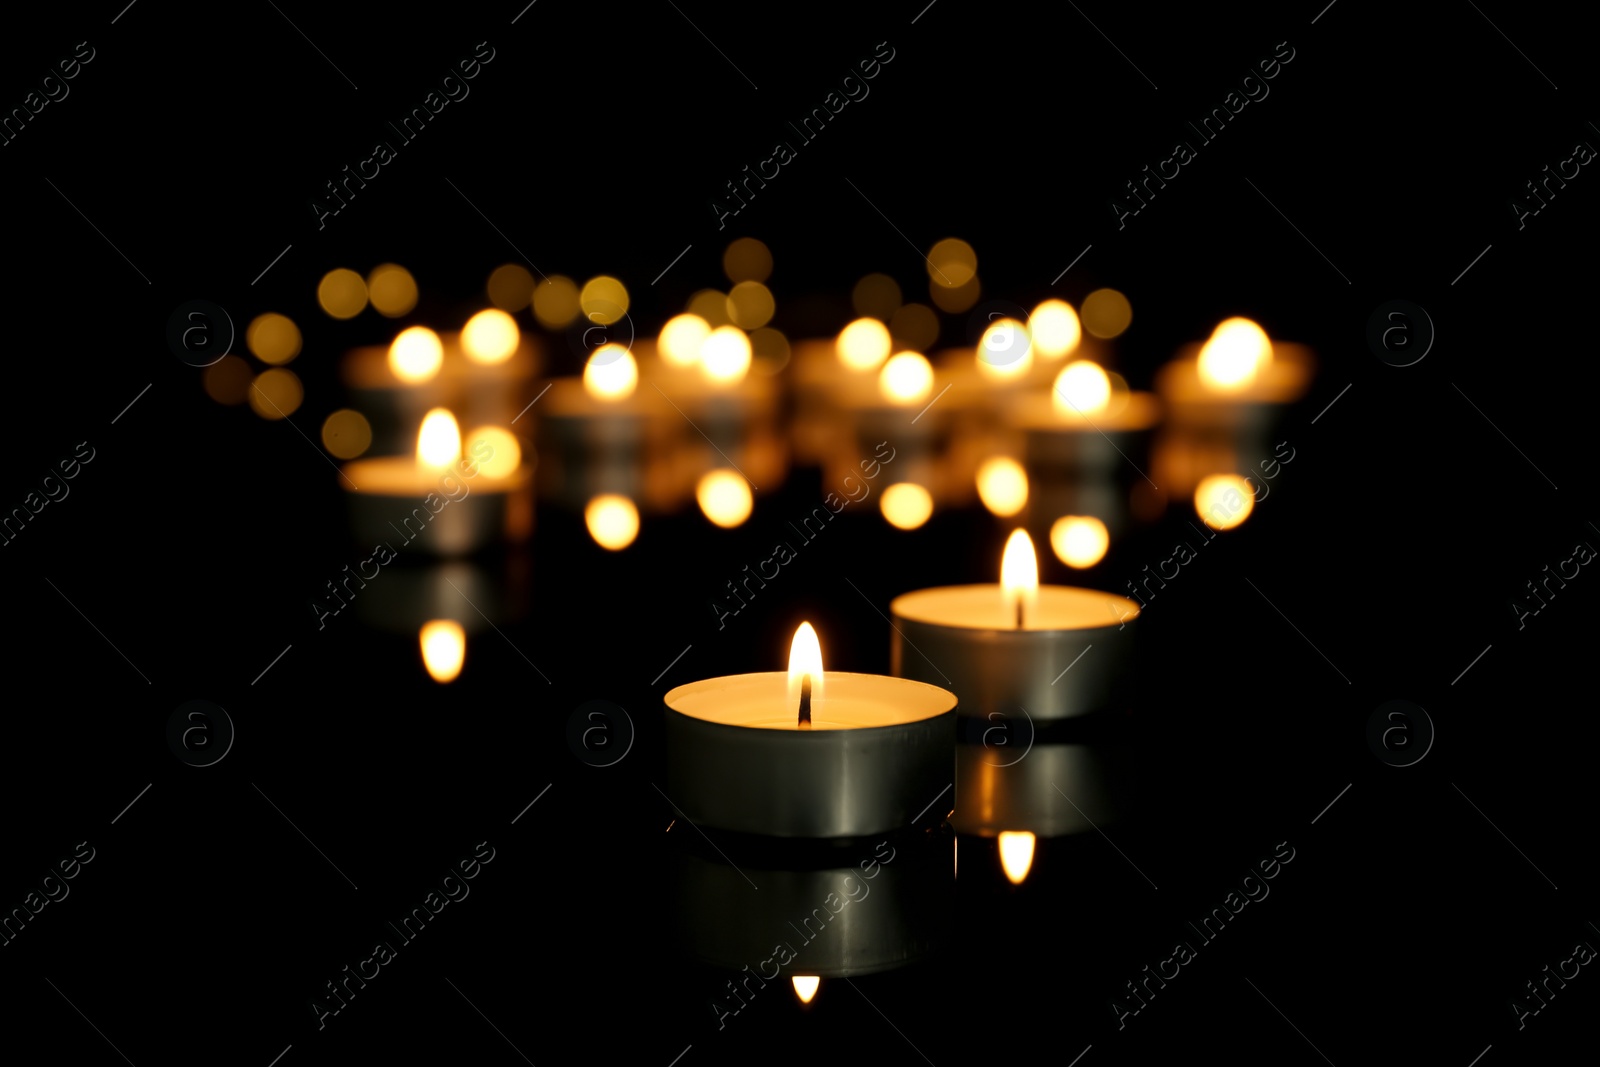 Photo of Burning candles on table against dark background